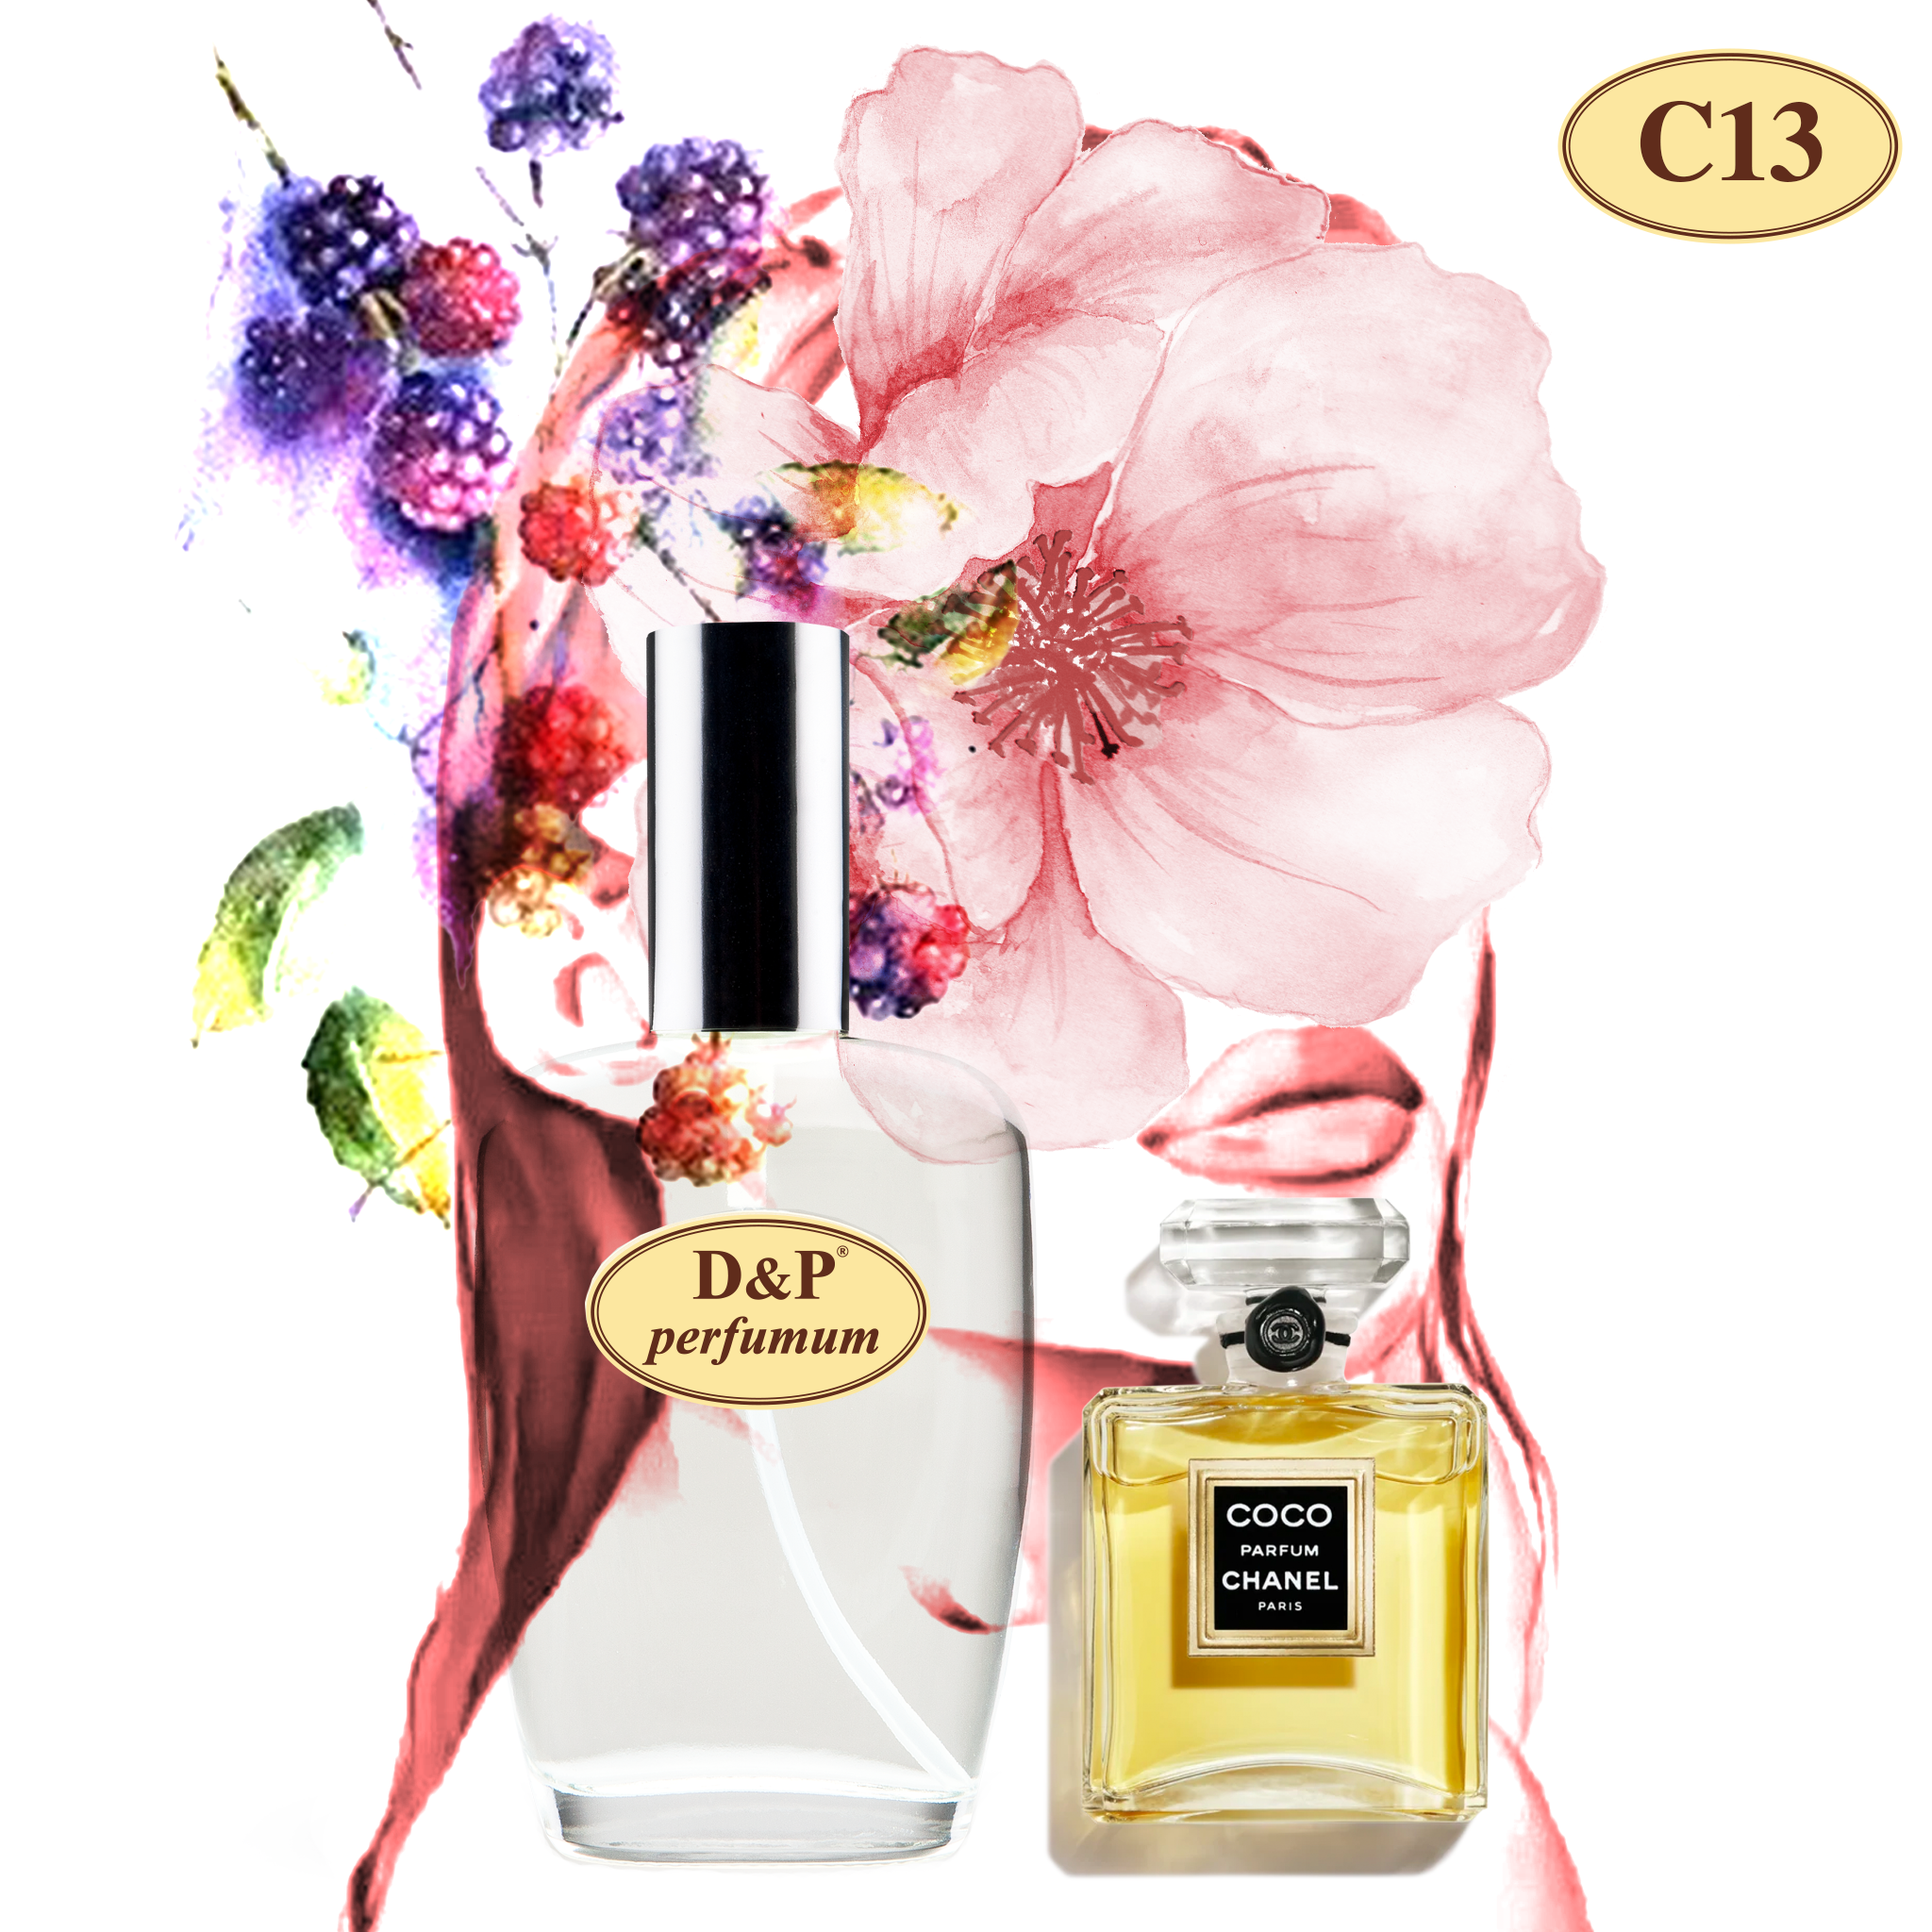 C13 Inspired By CHANEL - COCO – D&P Perfumum